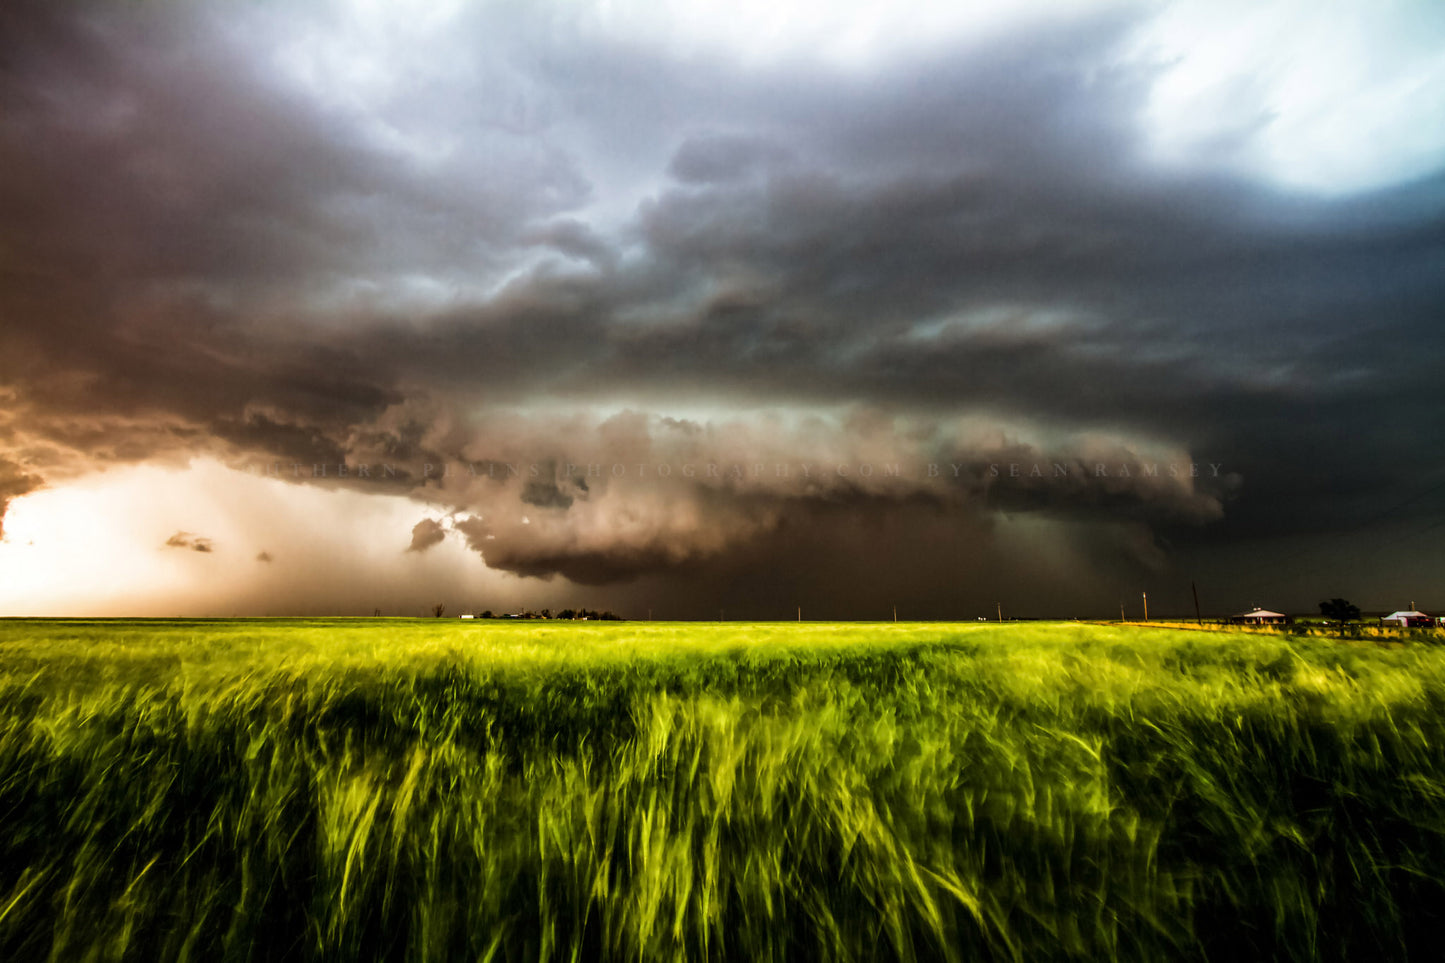 Storm photography print of a supercell thunderstorm with inflow winds pulling wheat toward it on a stormy spring day in Oklahoma by Sean Ramsey of Southern Plains Photography.